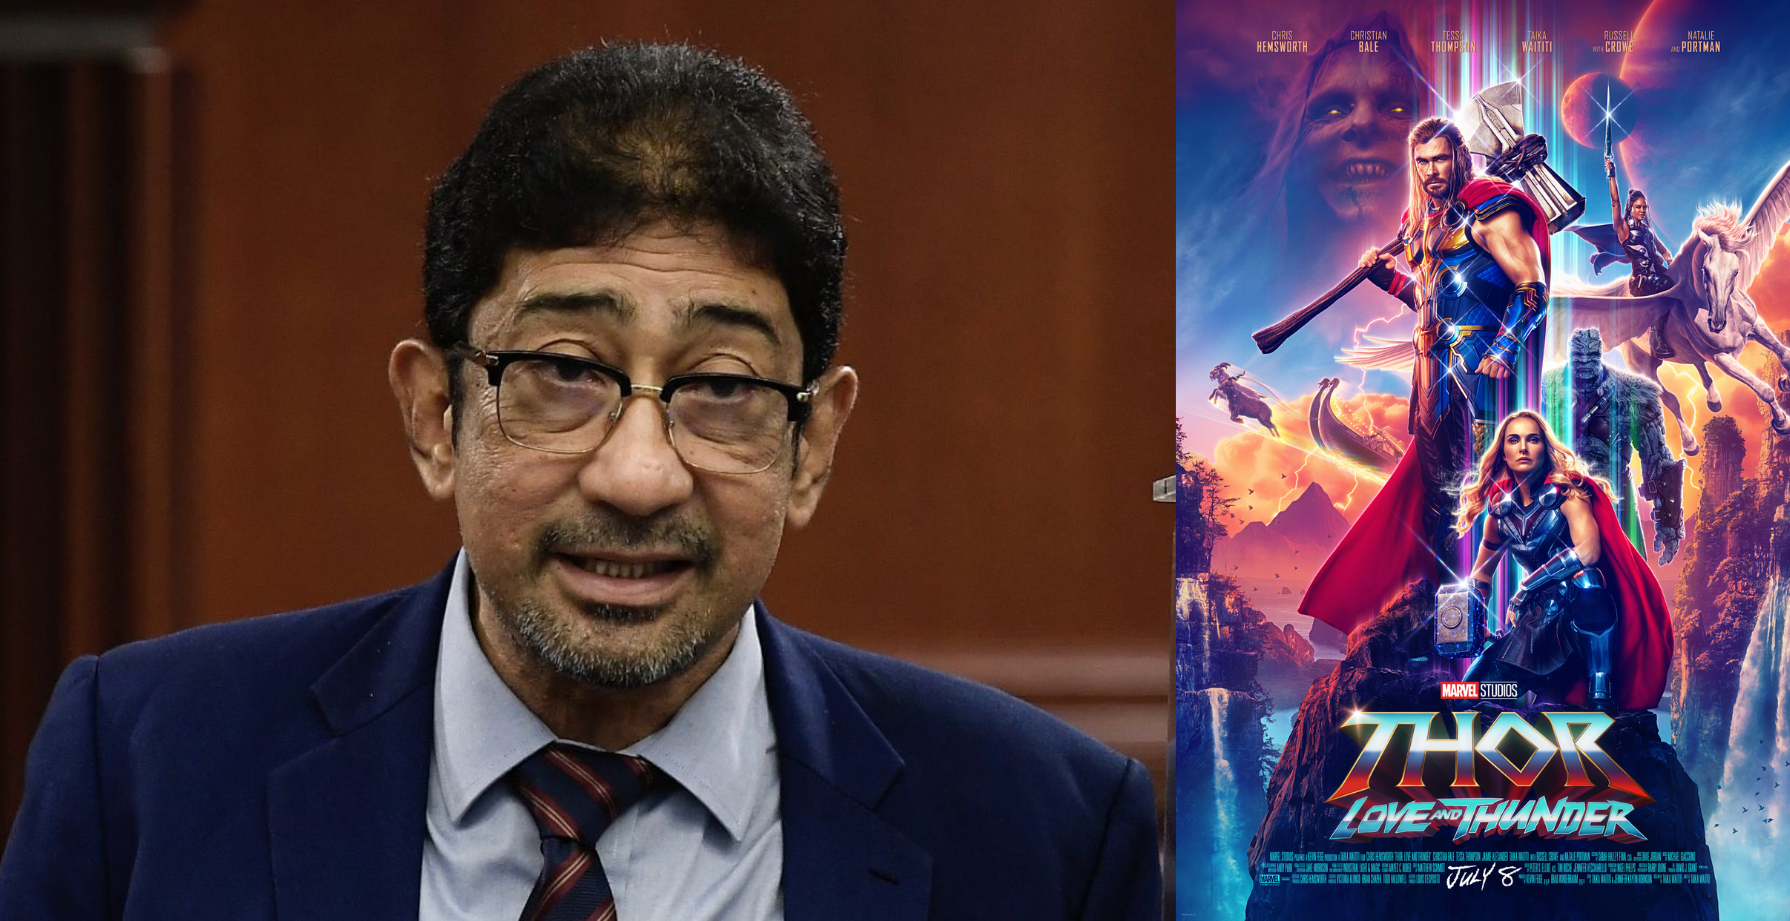 During the Dewan Negara, the Deputy Communications and Multimedia Minister gave the official reason behind why Thor: Love and Thunder was banned in Malaysia.